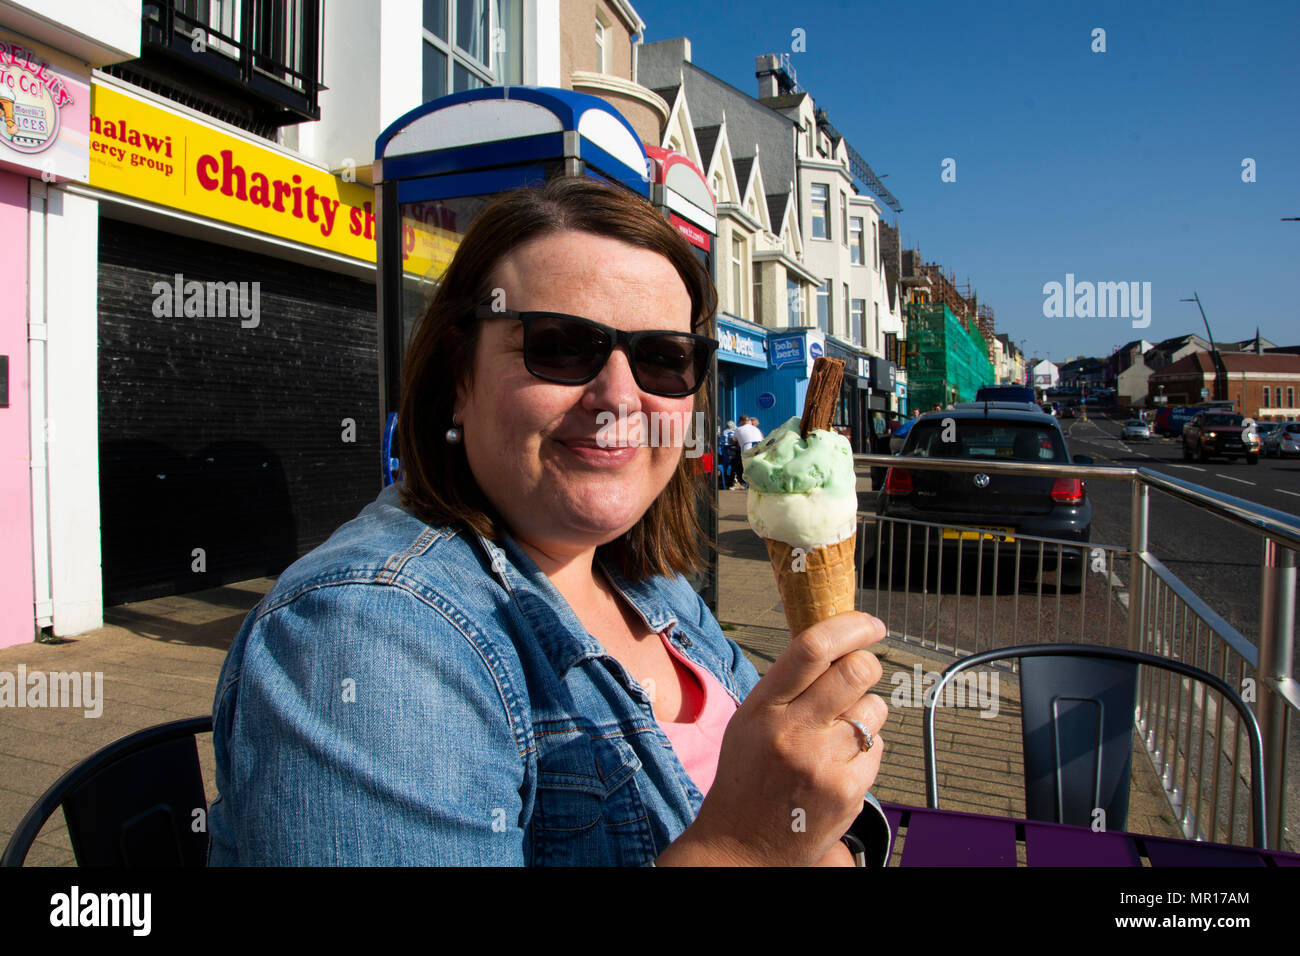 Portstewart, Northern Ireland, Friday 25th May 2018. The Promenade Portstewart, Northern Ireland. As the Hottest weekend so far this year begins an ice cream and a sea breeze is required to cool things down a bit. Credit: Brian Wilkinson/Alamy Live News Stock Photo